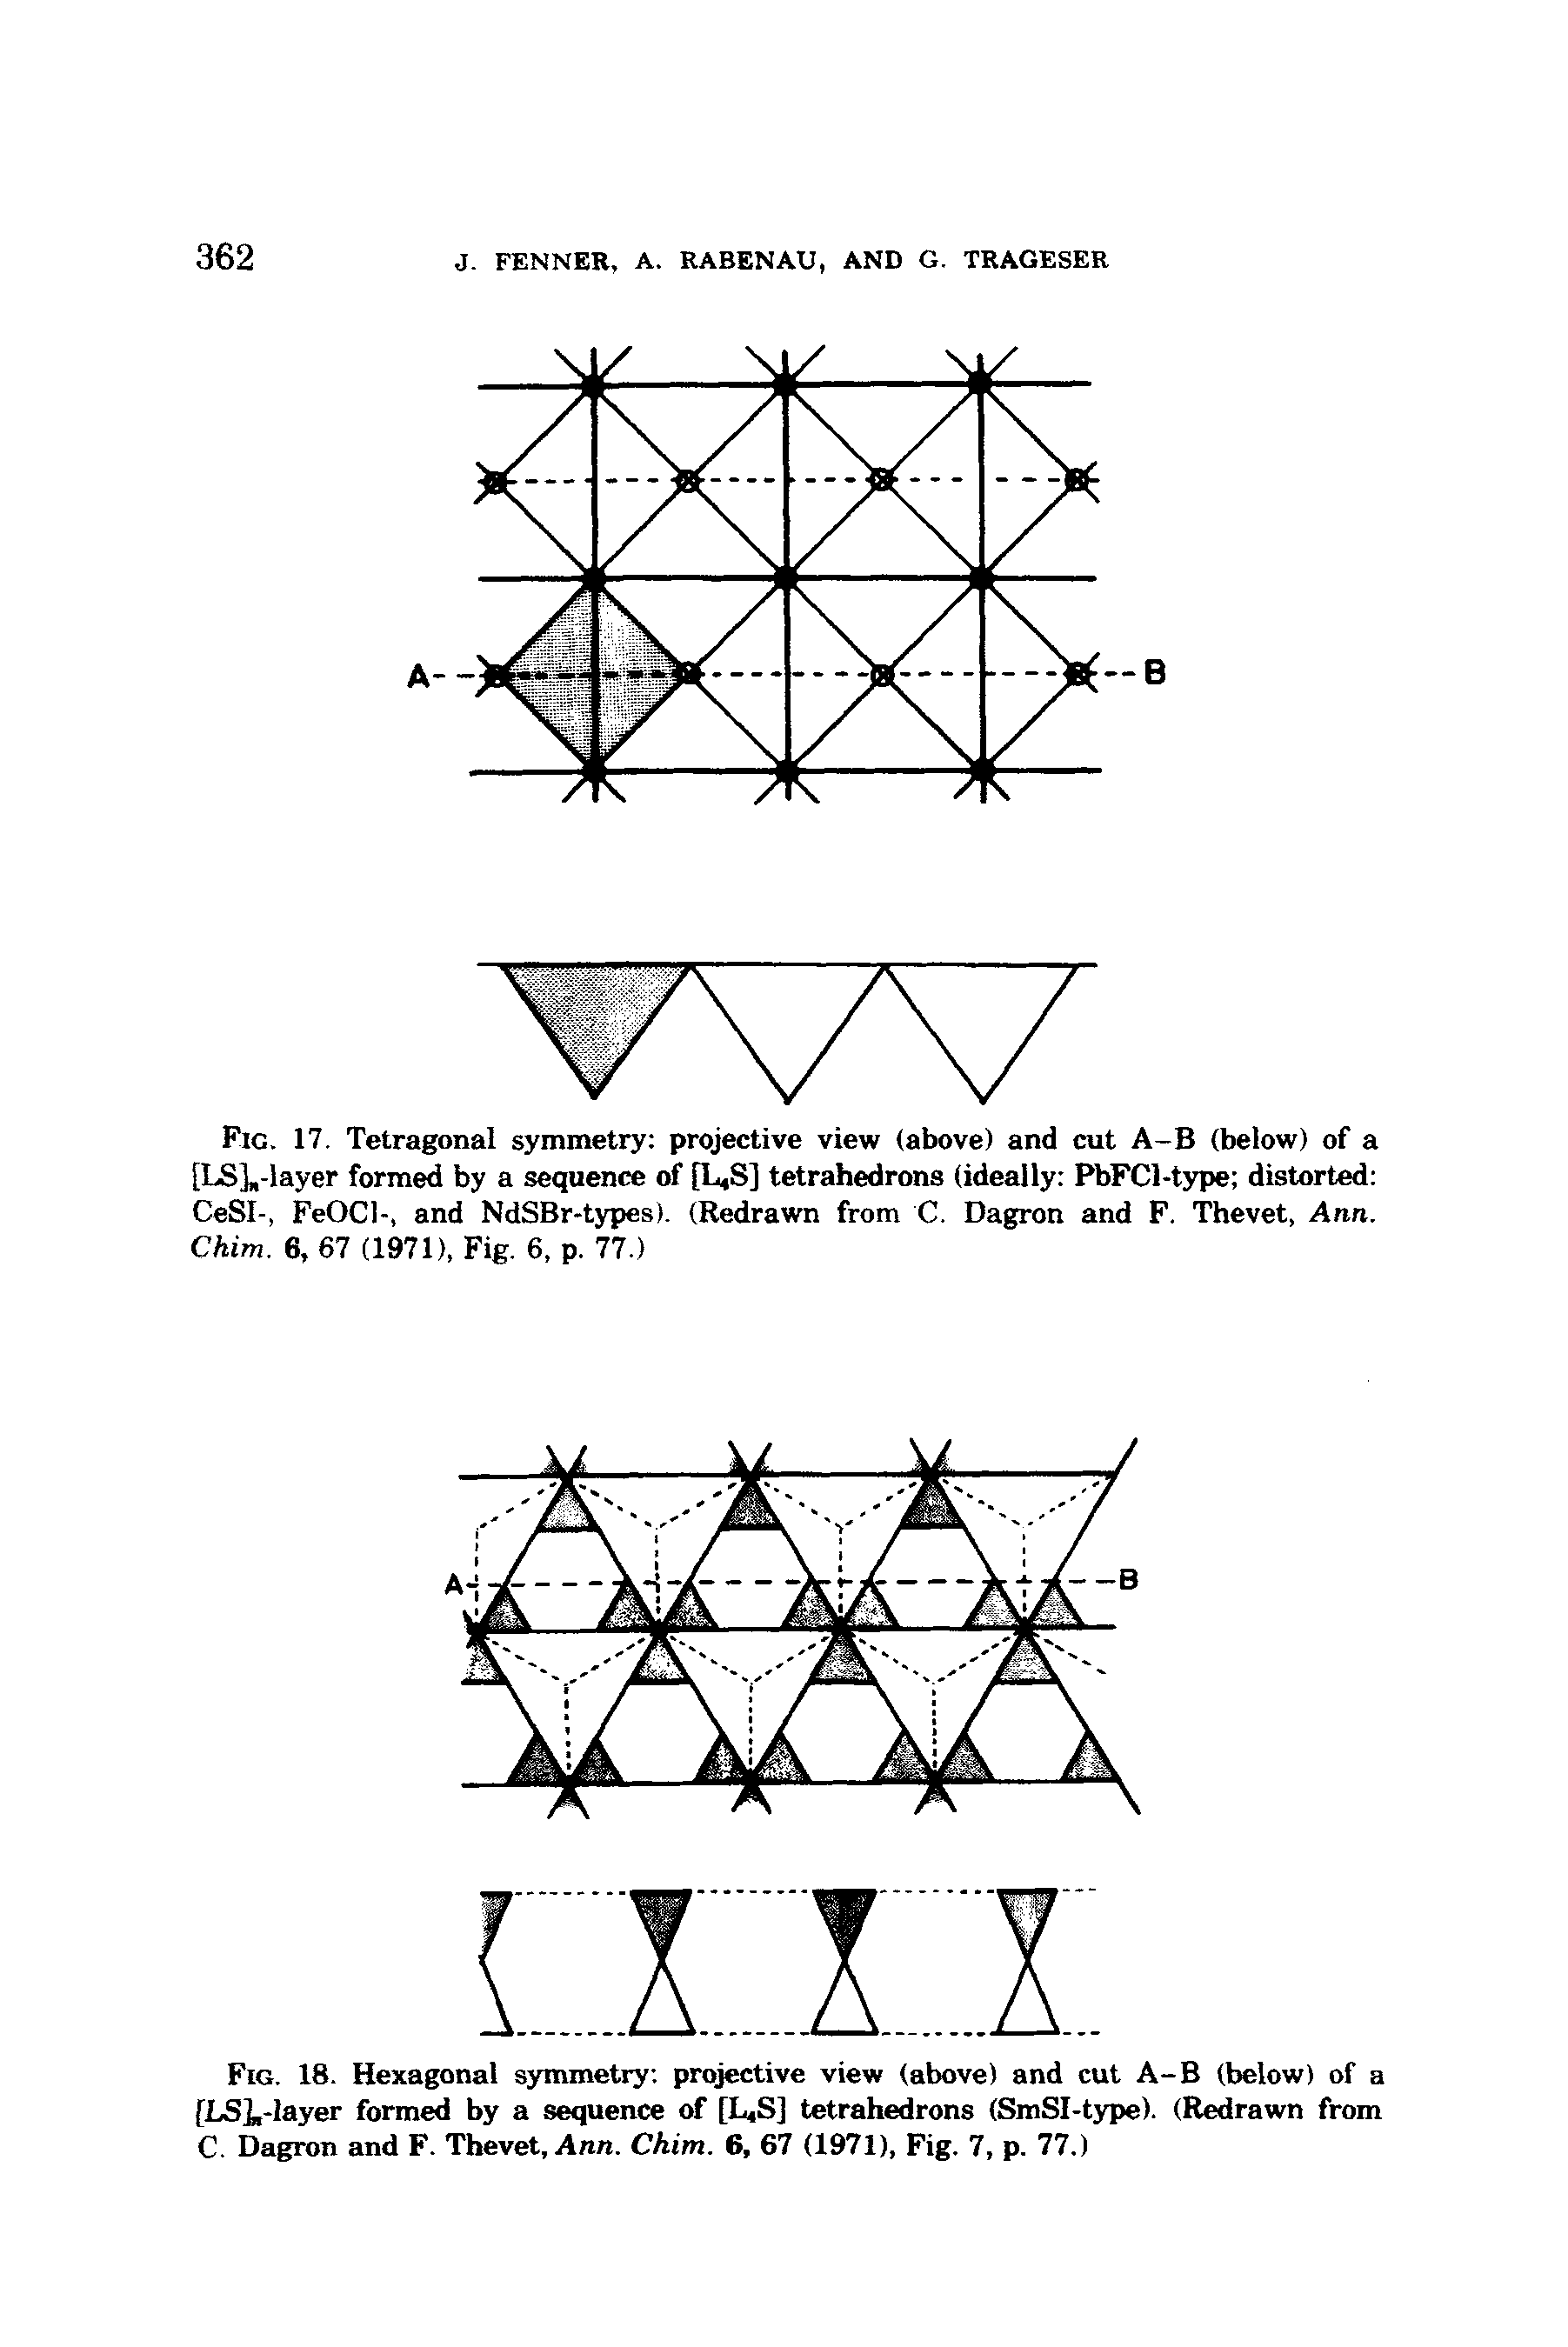 Fig. 18. Hexagonal symmetry projective view (above) and cut A-B (below) of a [LSl,-layer formed by a sequence of [L4S] tetrahedrons (SmSI-t3rpe). (Redrawn from C. Dagron and F. Thevet, Ann. Chim. 6, 67 (1971), Fig. 7, p. 77.)...